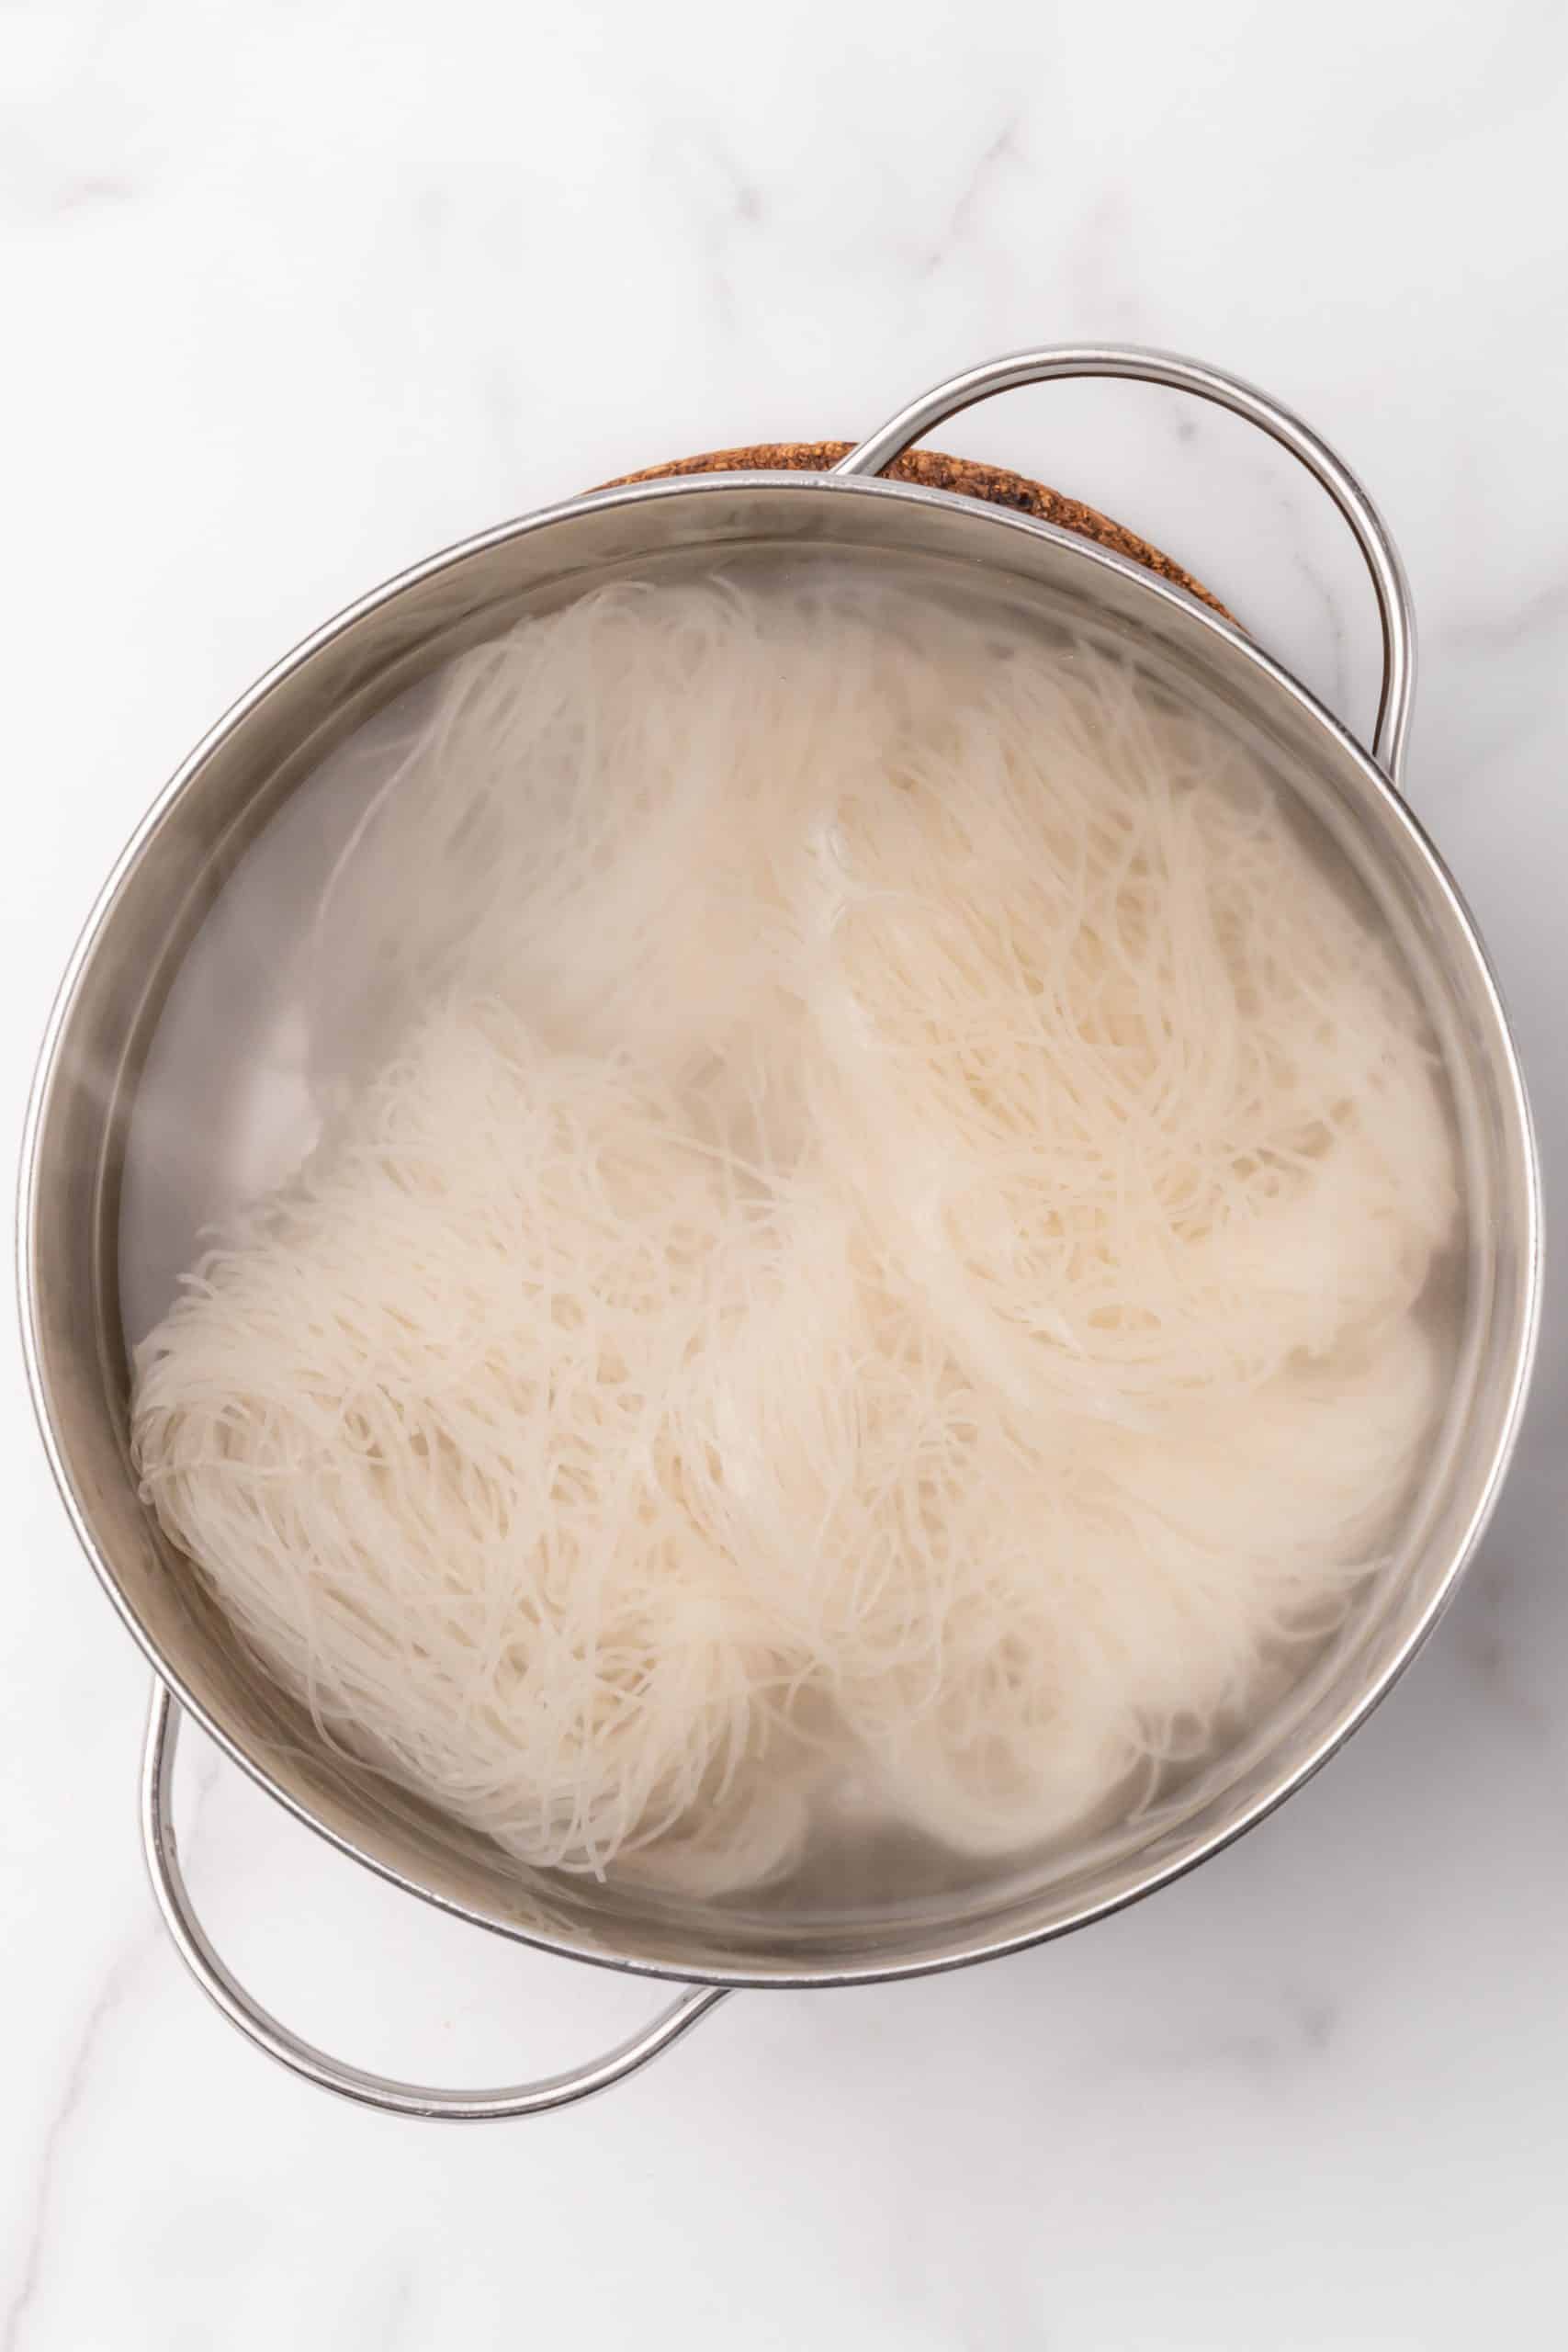 rice noodles in a pot of hot water